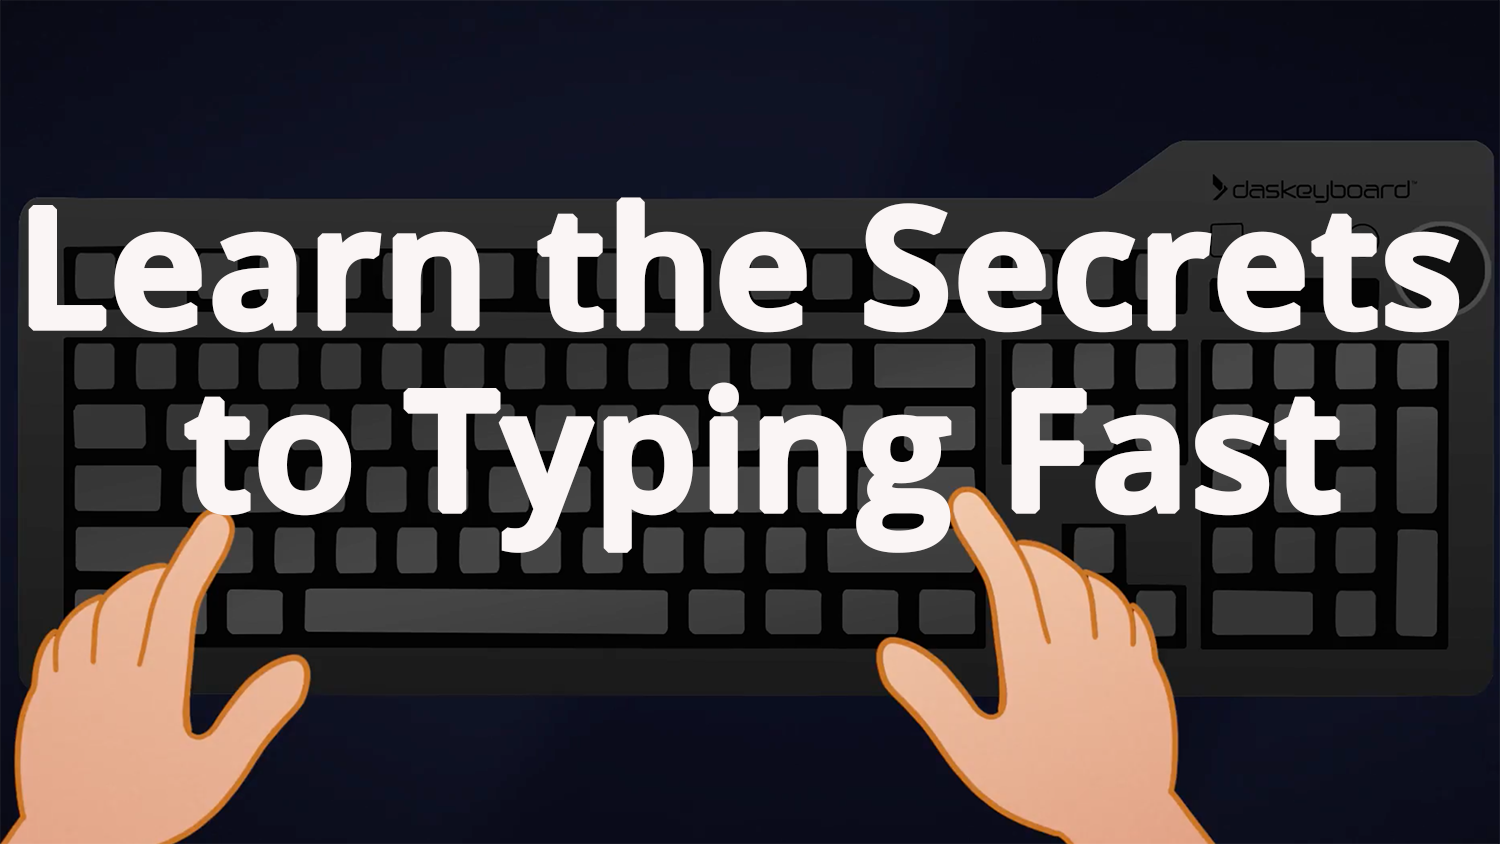 How to join the competitive typing community - Das Keyboard